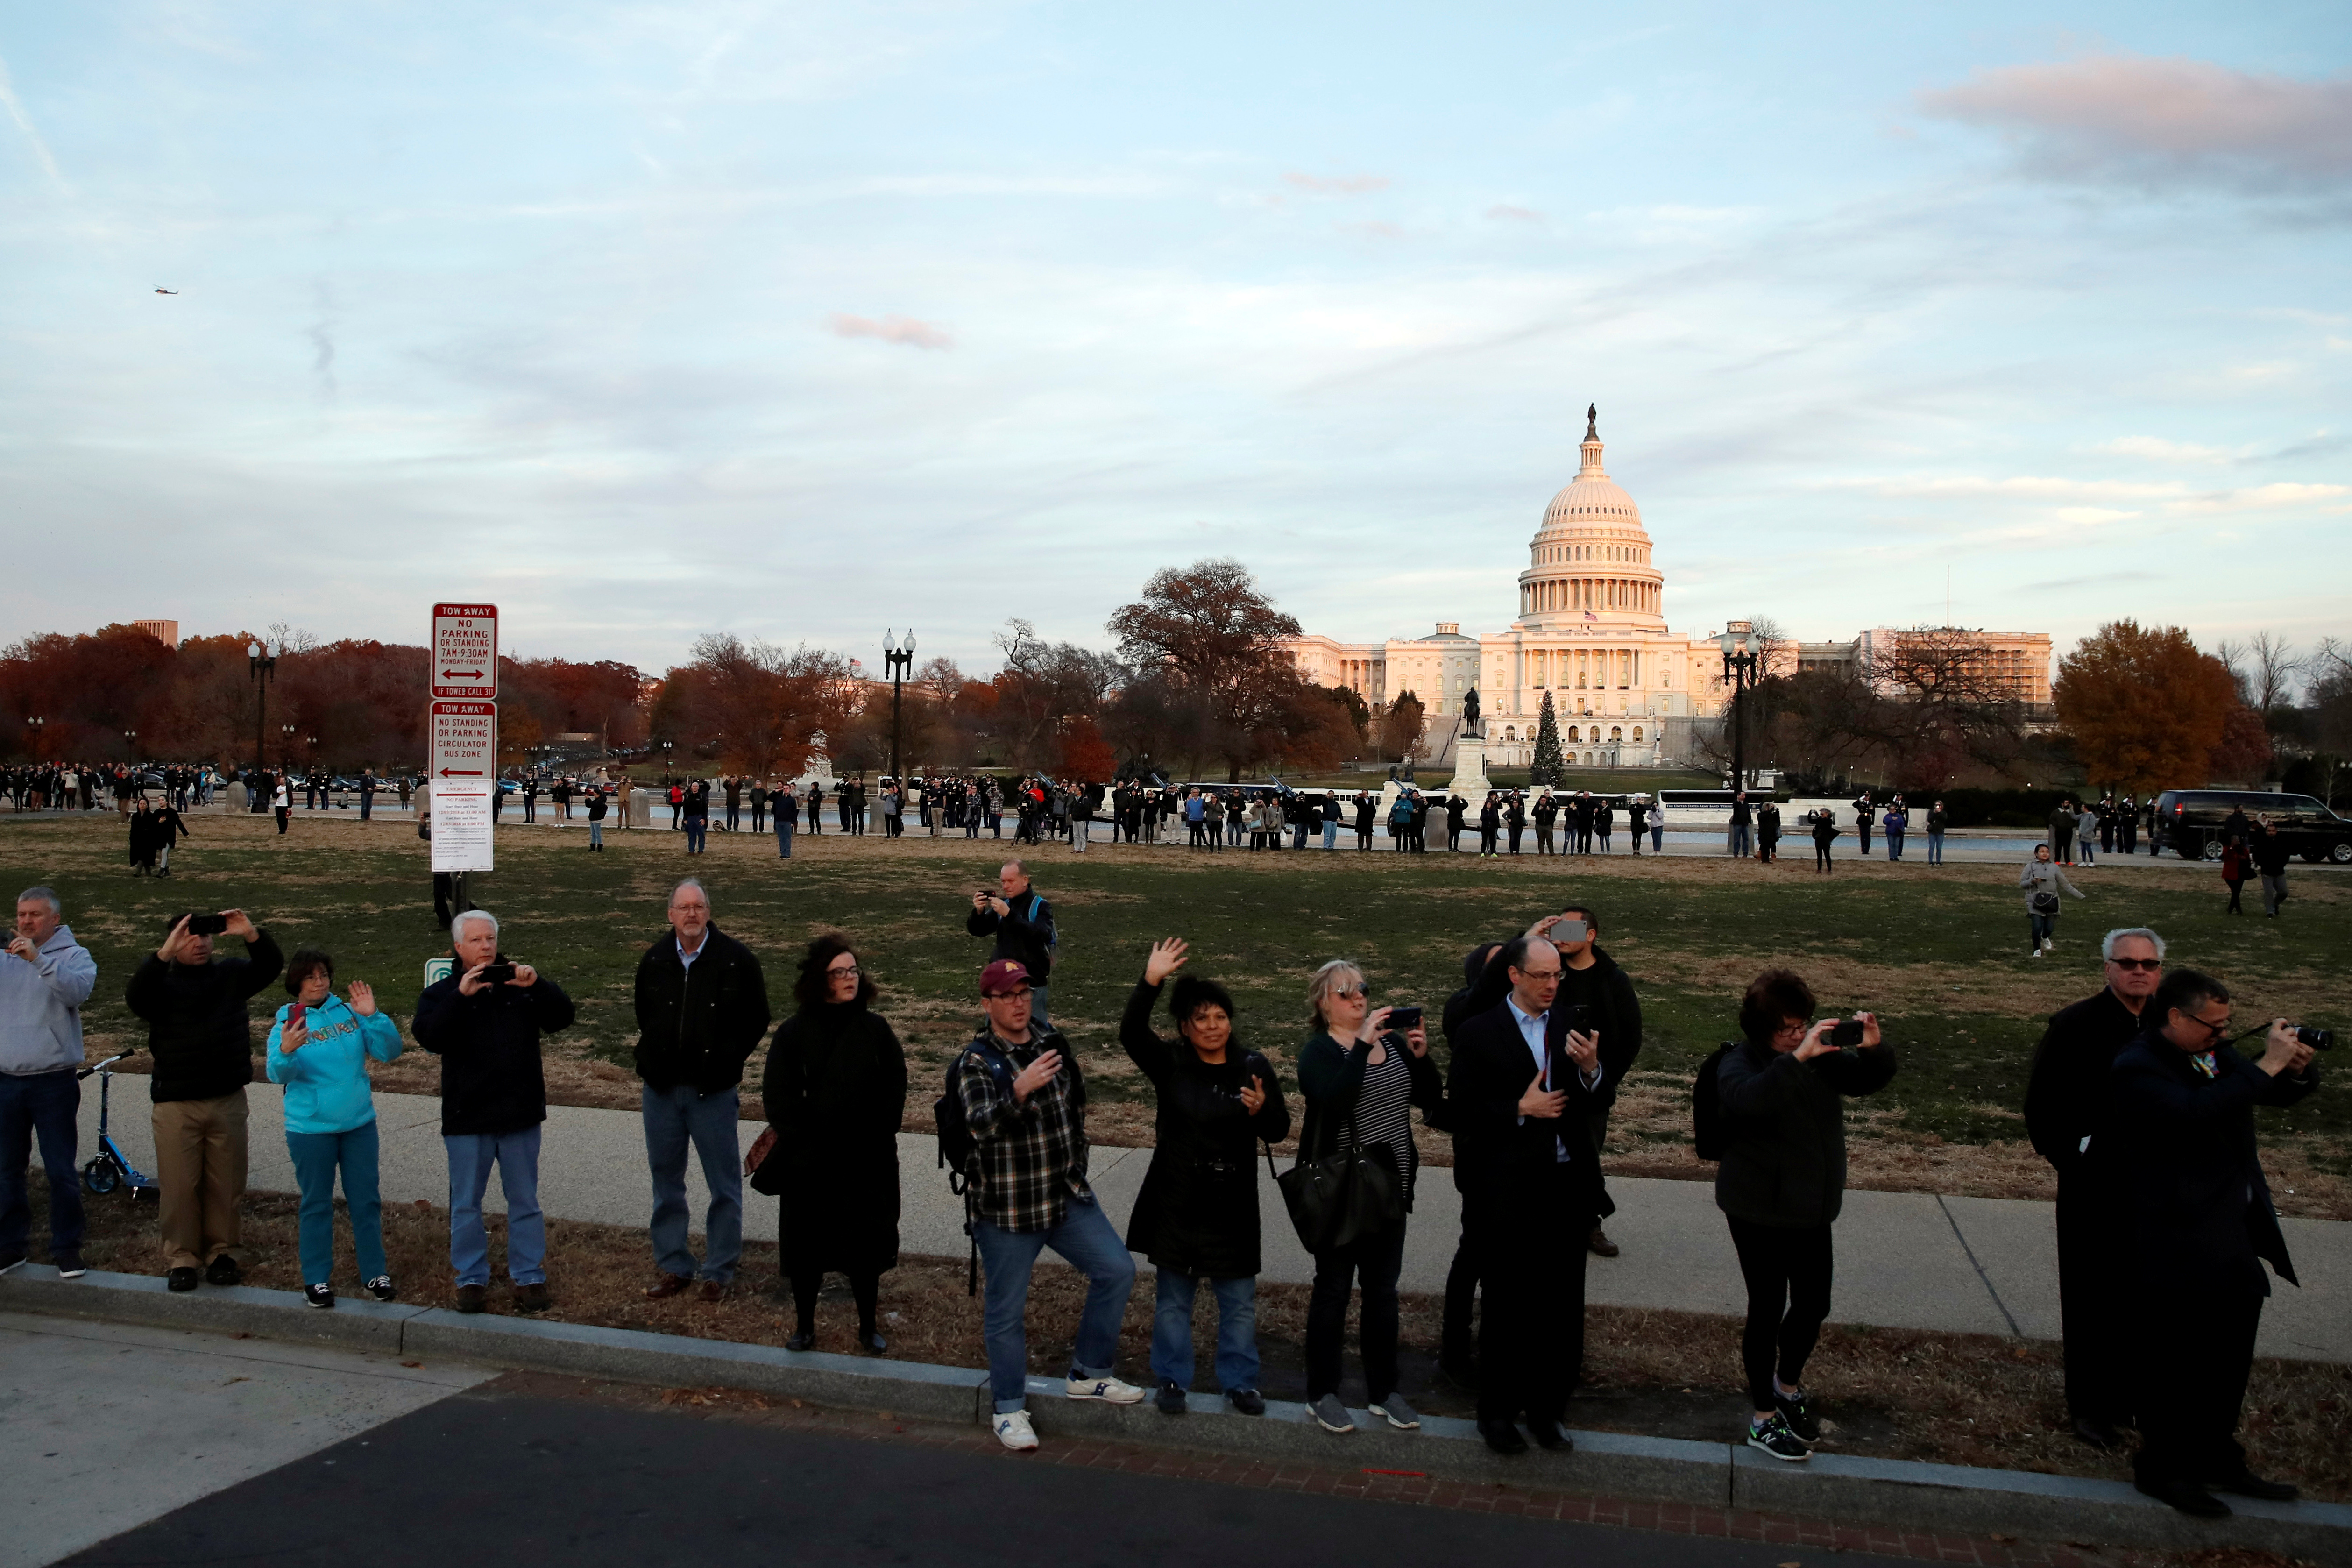 People watch as the hearse carrying the remains of former President George H.W. Bush passes by the West Front of the U.S. Capitol, in Washington, U.S., December 3, 2018. (Alex Brandon/Pool via REUTERS)